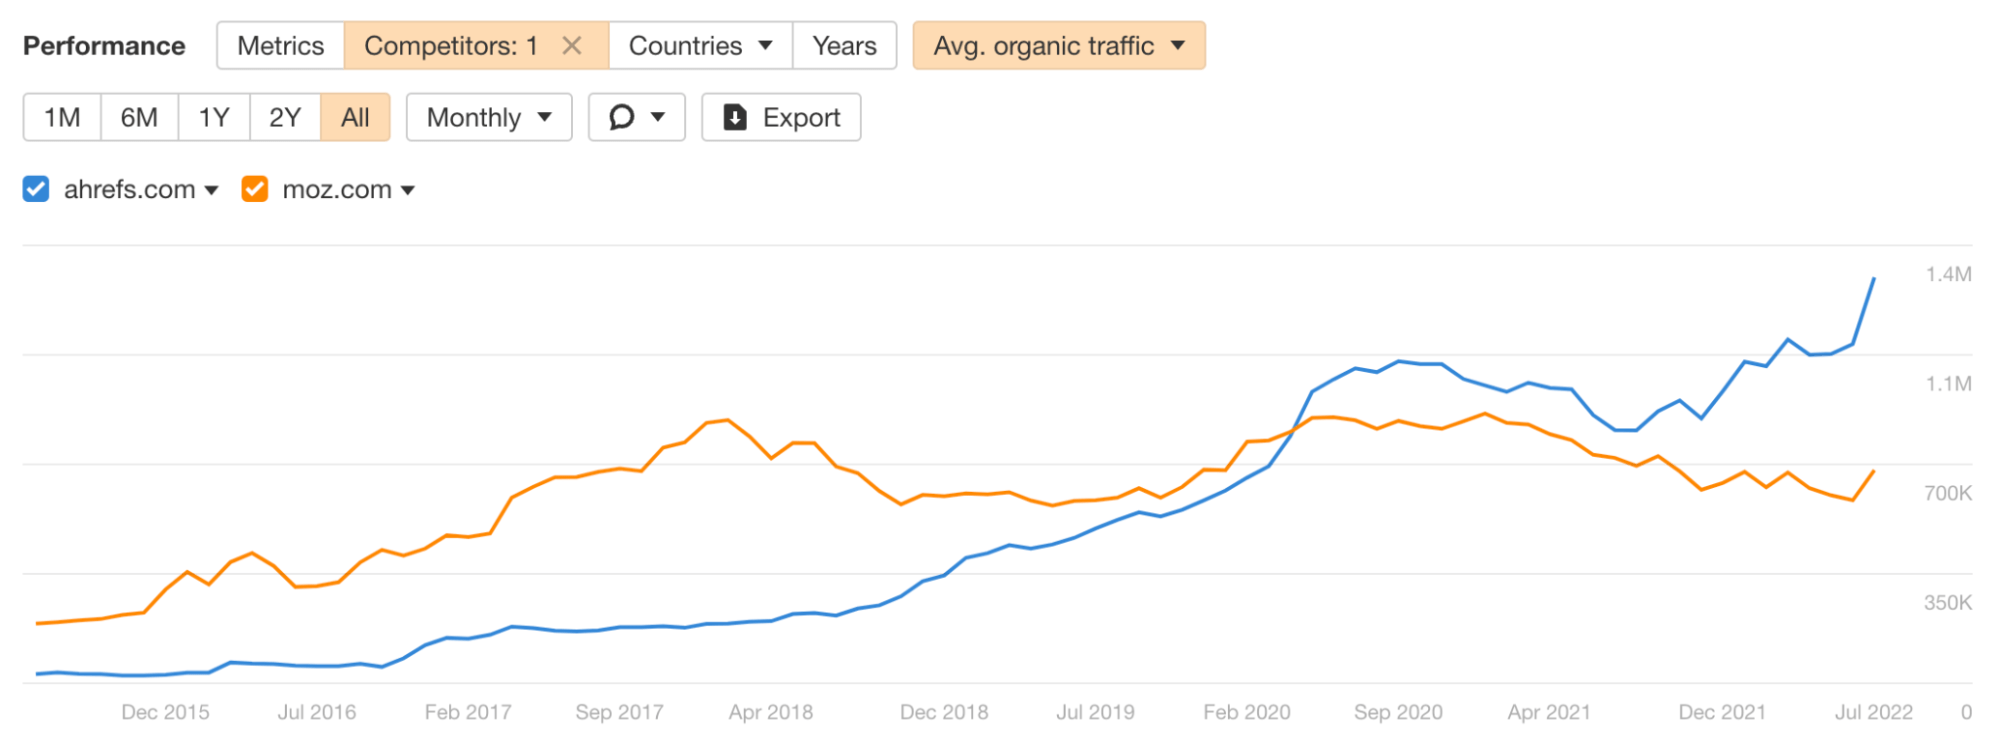 Estimated organic traffic performance for Ahrefs and Moz over time. Data via Ahrefs' Site Explorer